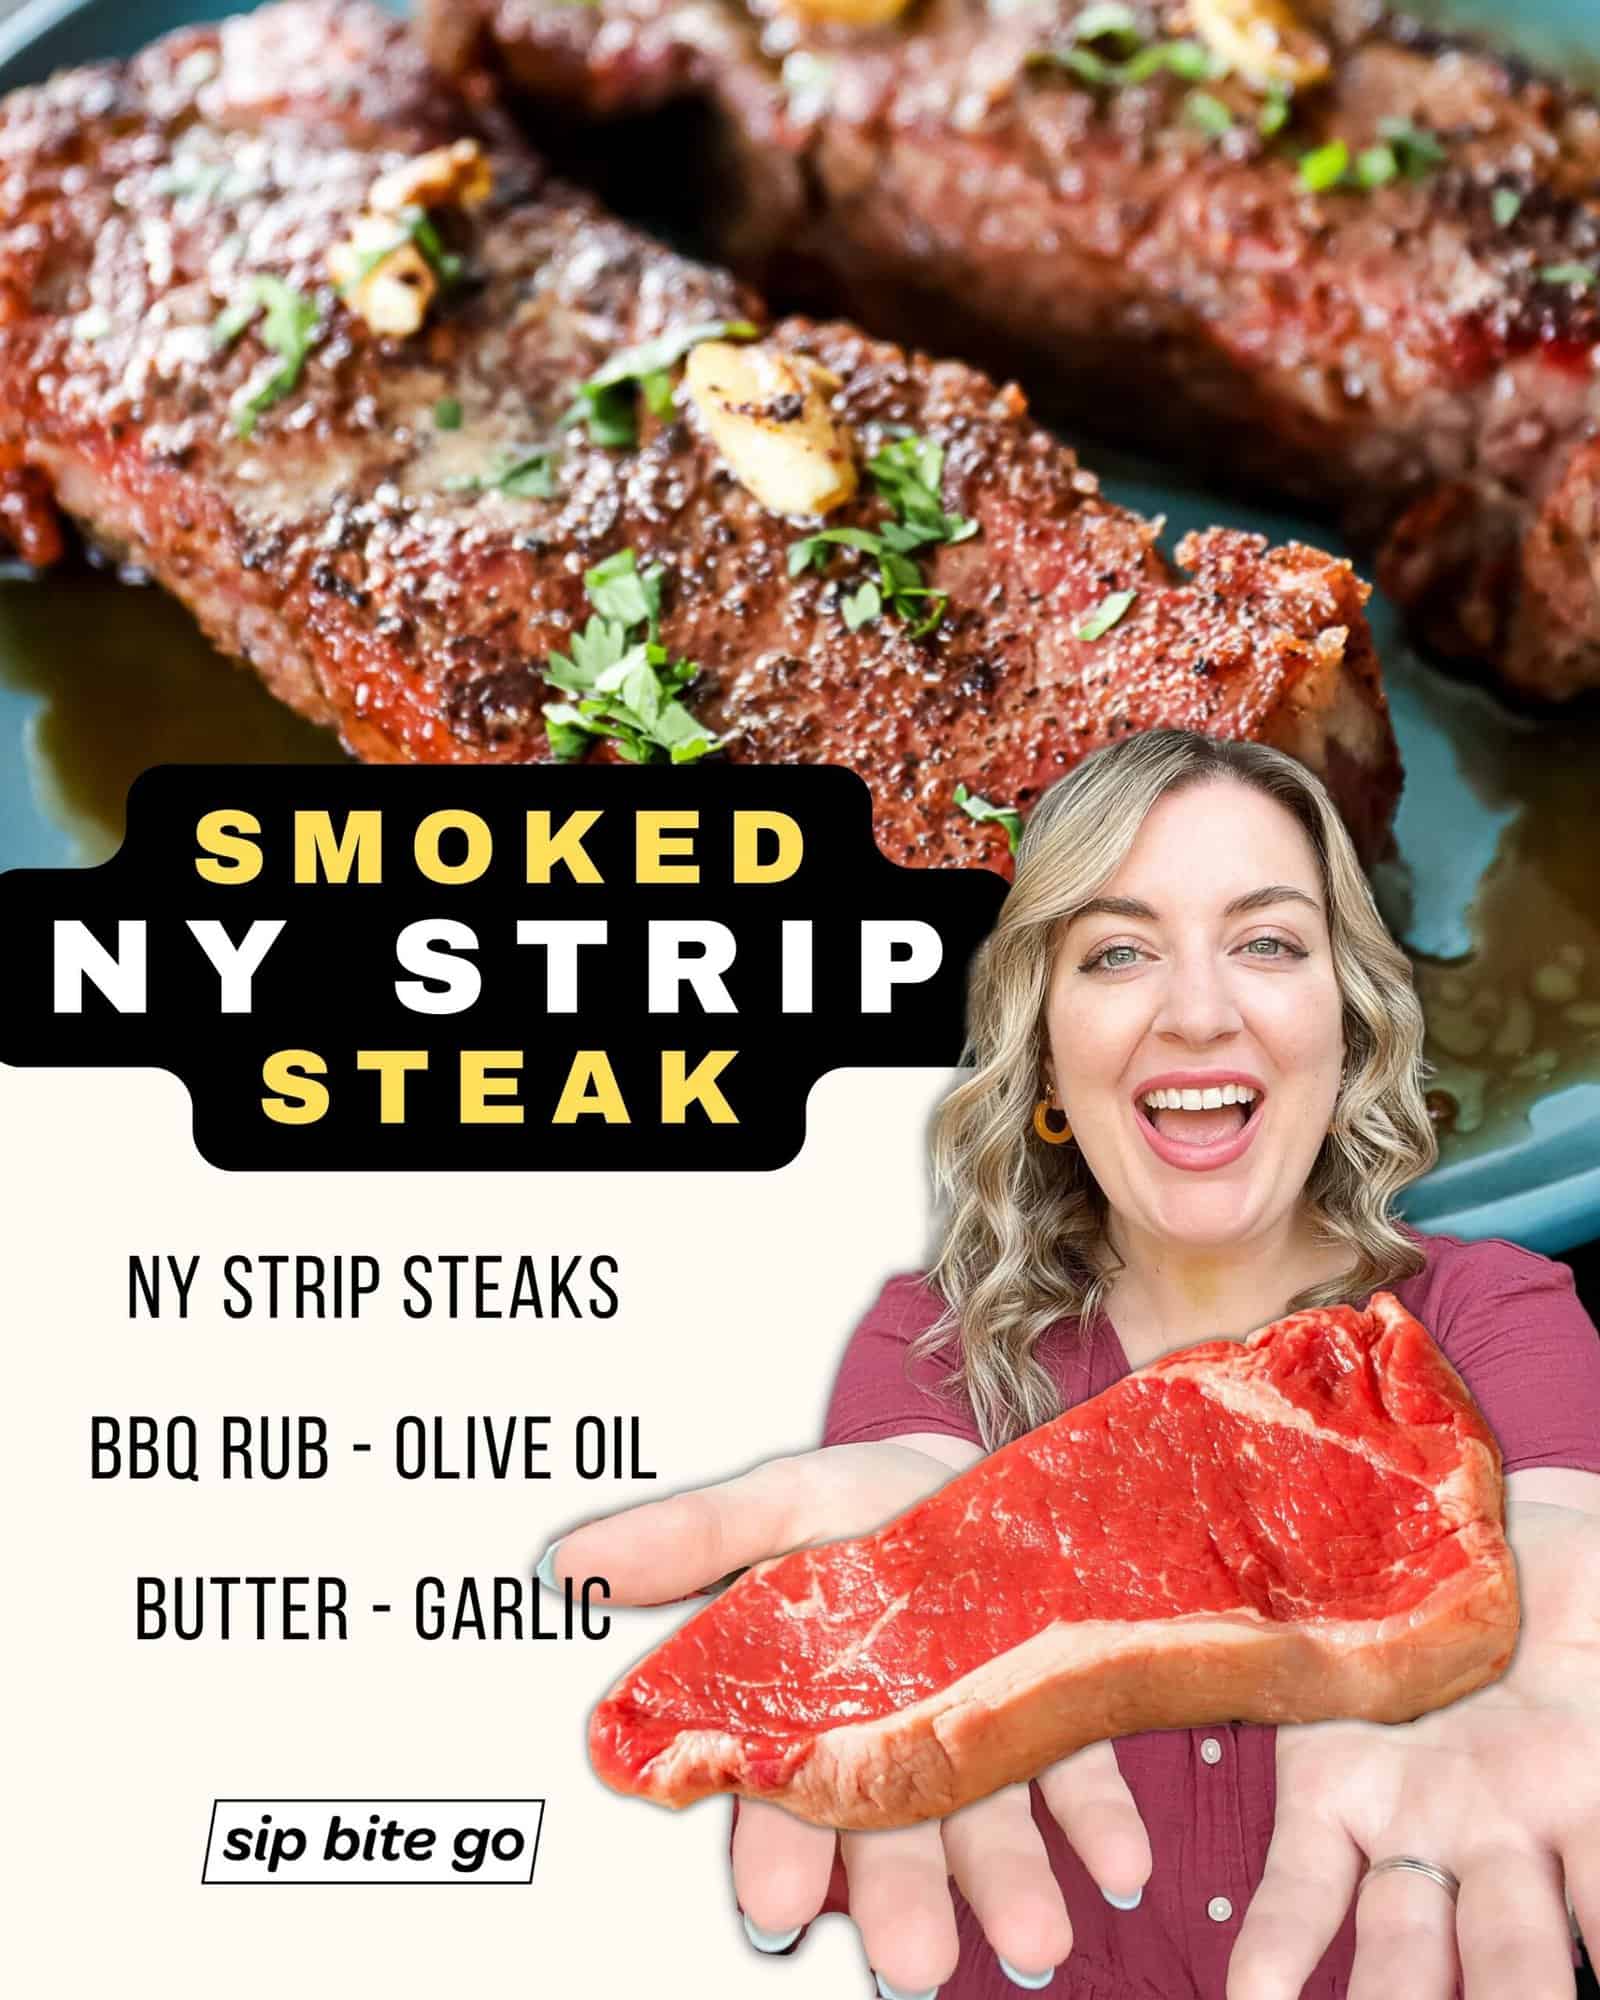 Infographic with list of ingredients for smoking NY strip steak on the Traeger pellet grill